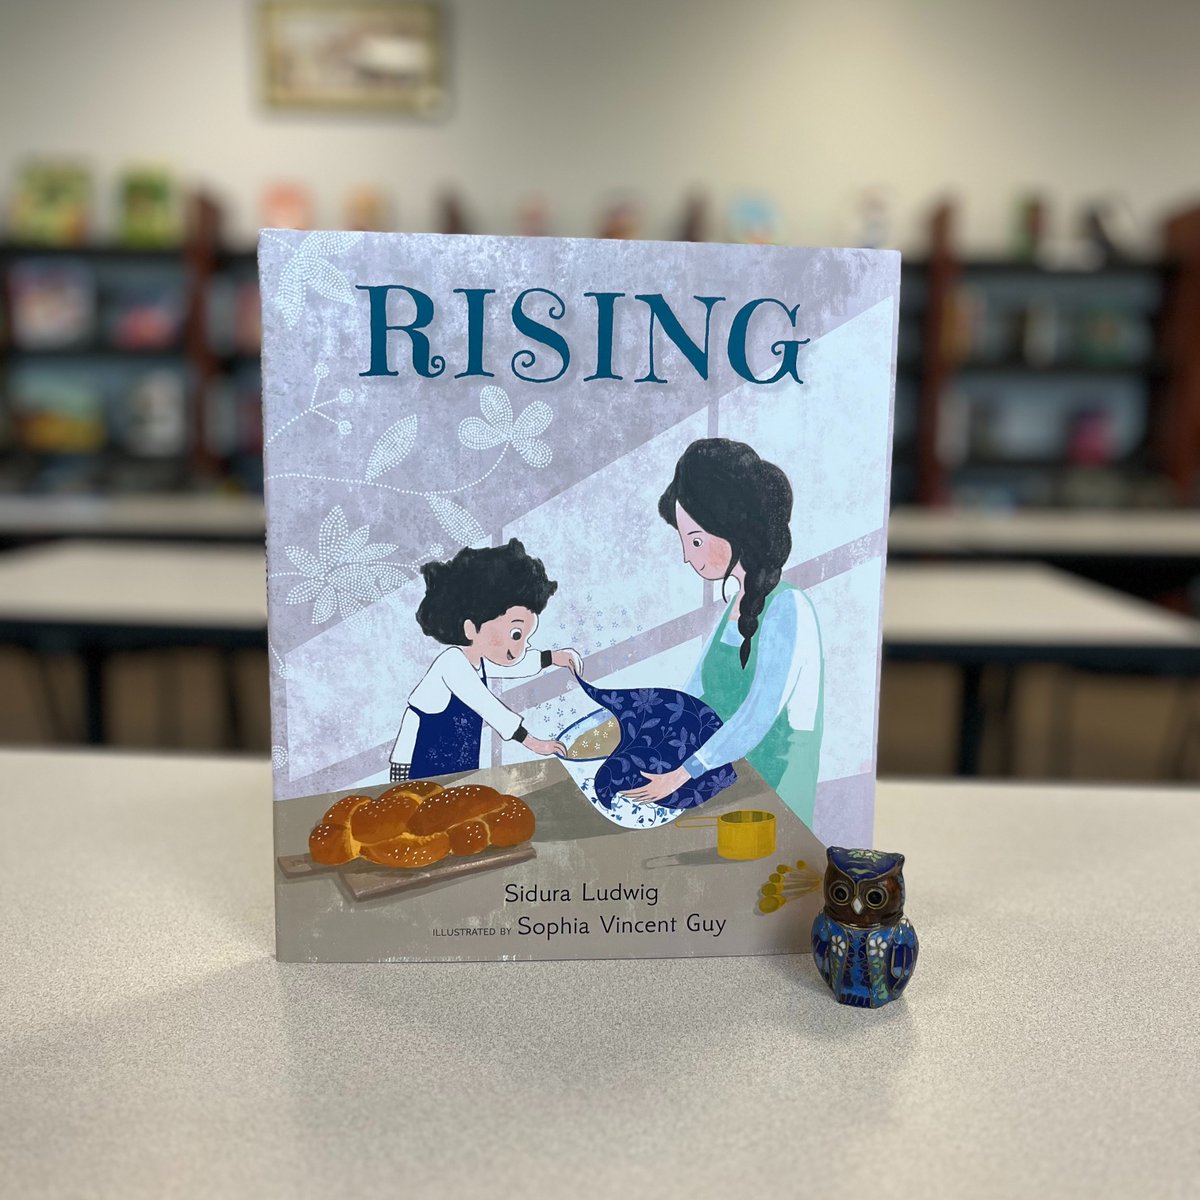 📚🥖 Rising by Sidura Ludwig and illustrated by Sophia Vincent Guy. #dailybutlershelfie #JewishAmericanHeritageMonth #Rising #SiduraLudwig #SophiaVincentGuy @Candlewick